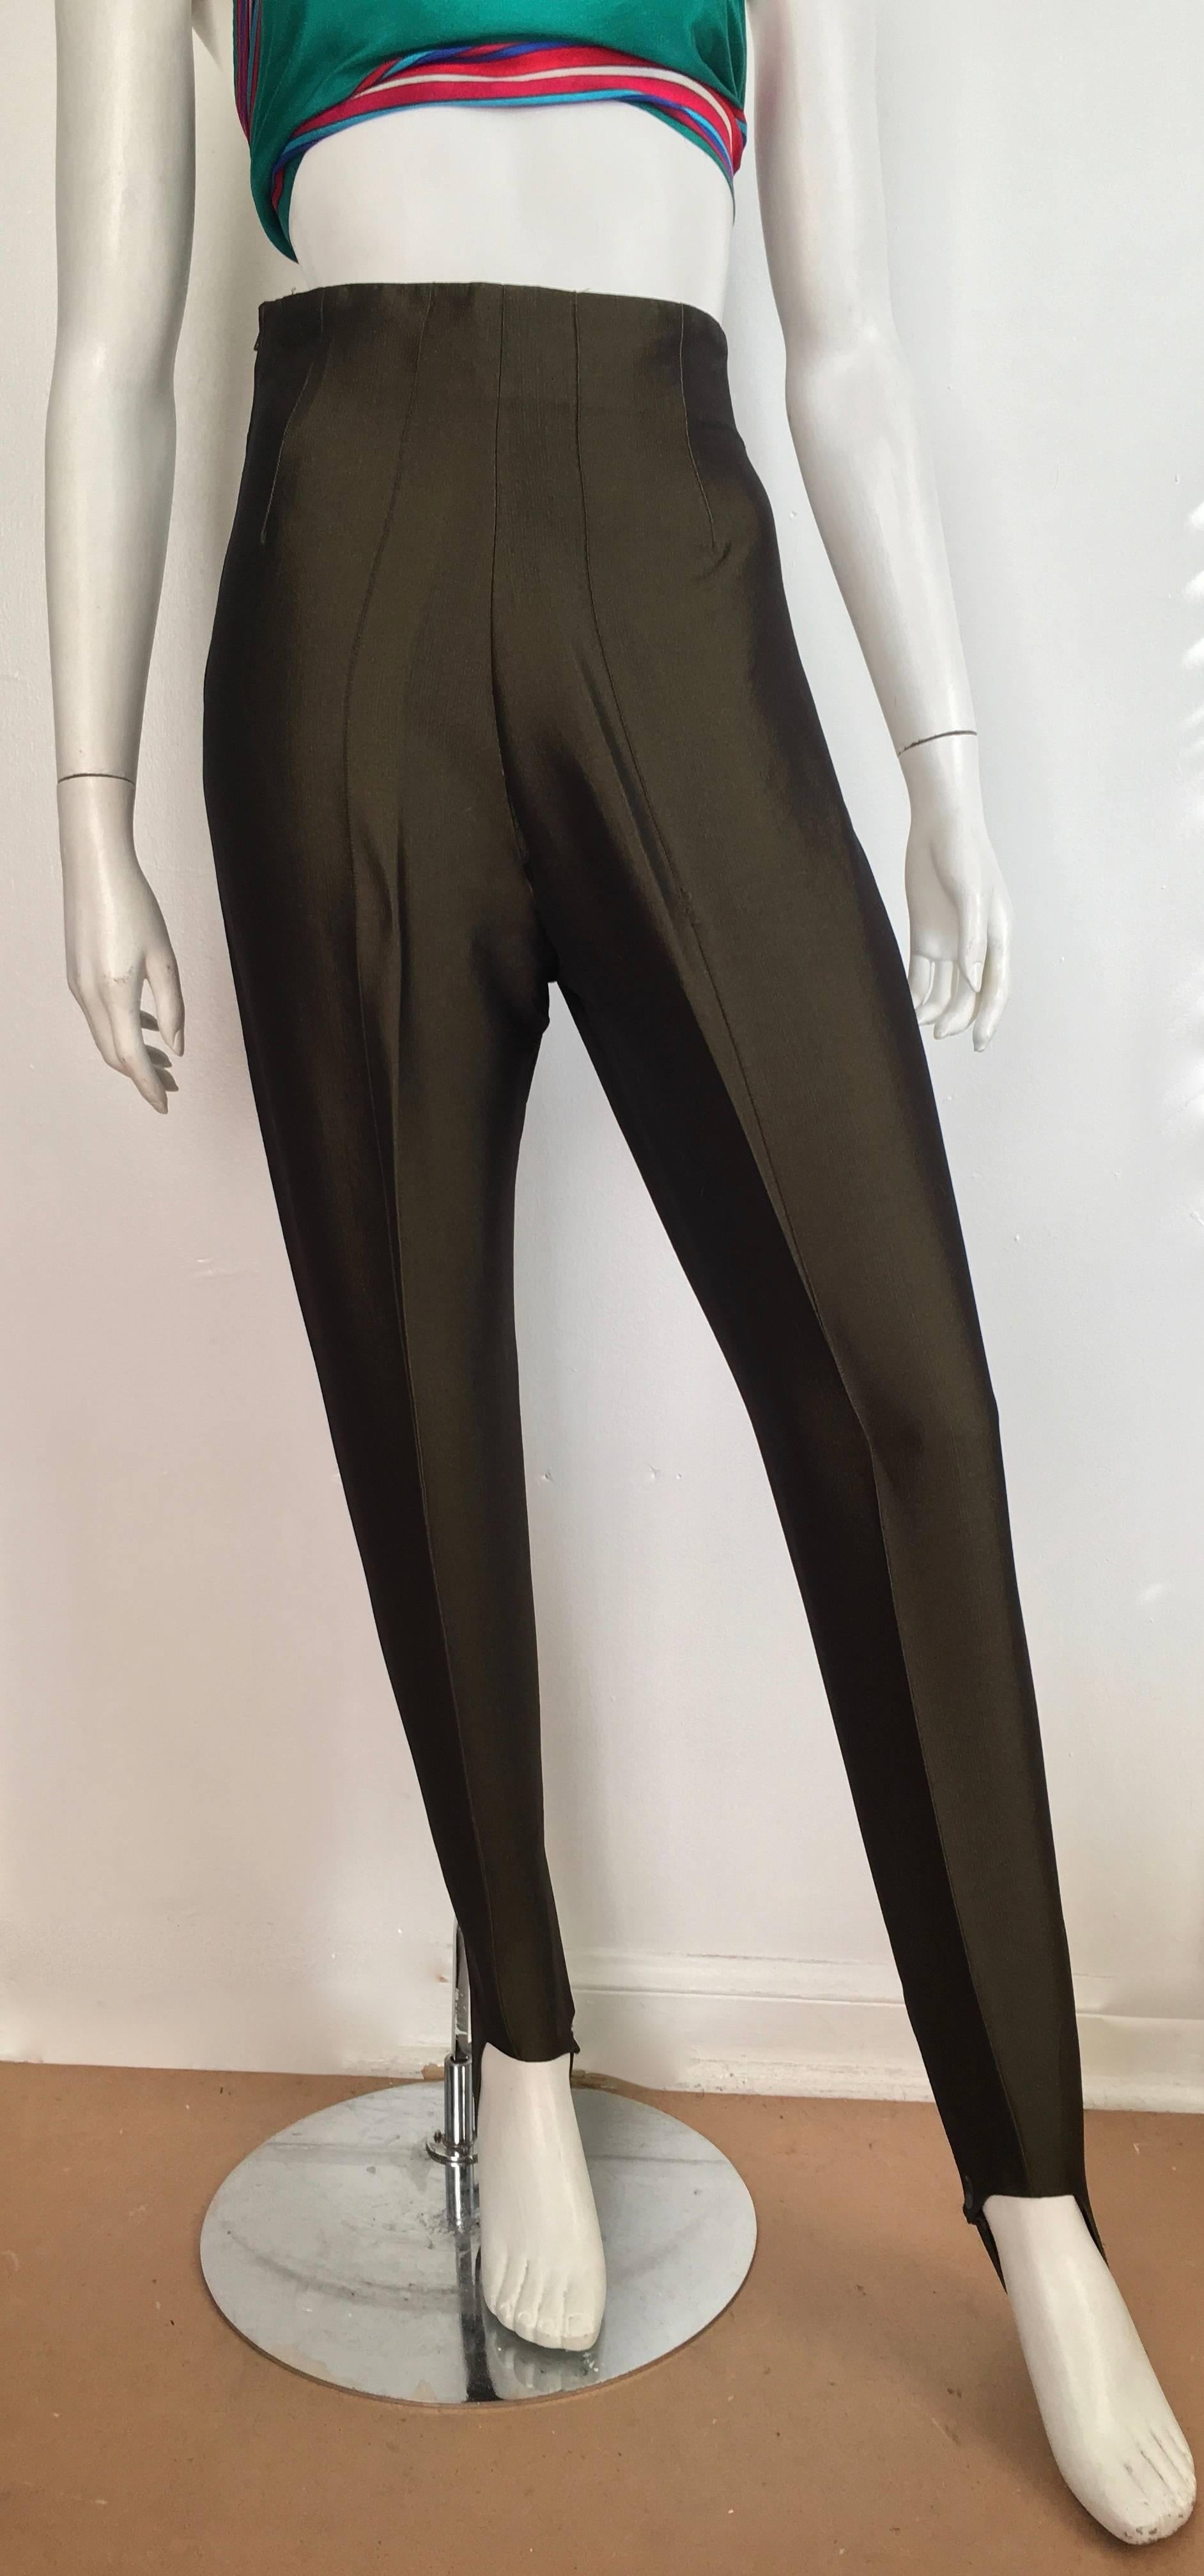 Romeo Gigli 1980s metallic sharkskin stretchy stir up pants are an Italian size 42 and will fit a size 4.  The waist is 27. 1/2